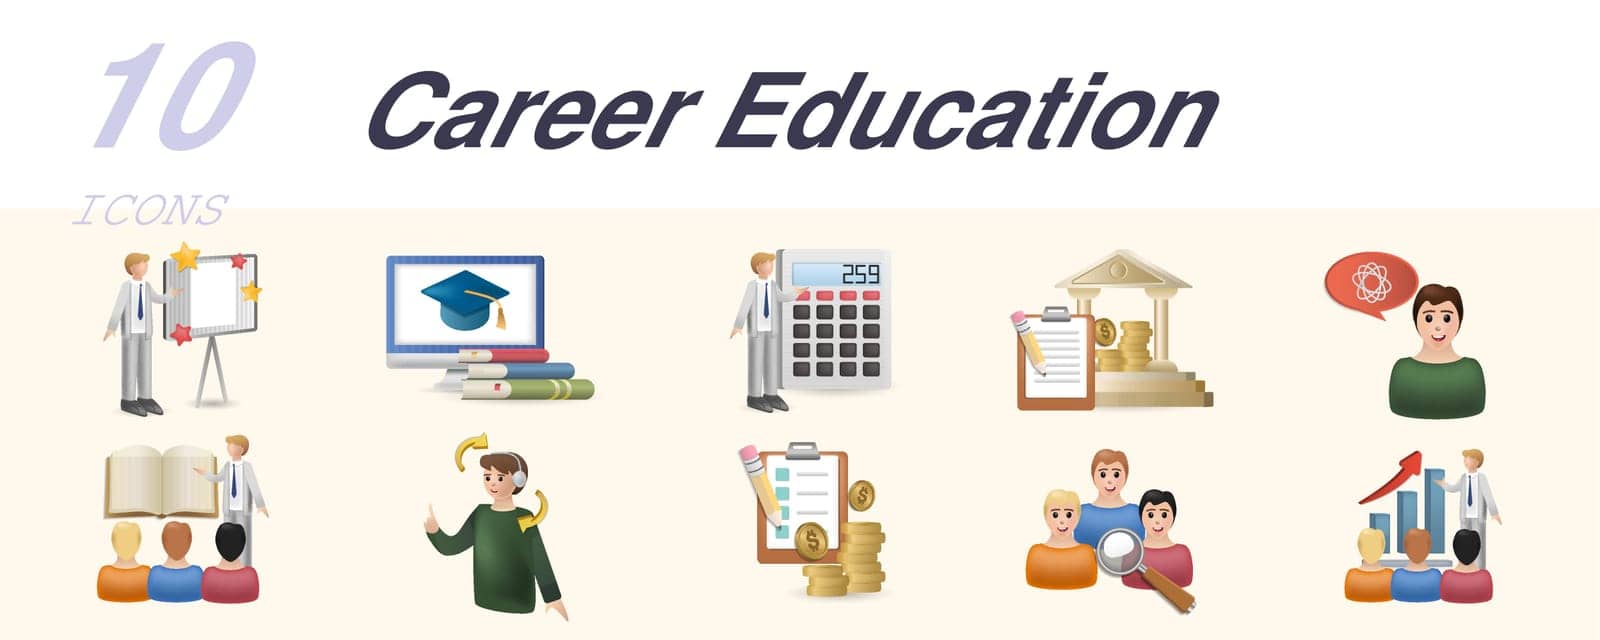 Career education icons set. Creative elements: presentation, lessons, accounting staff, loan, thinking, teaching, help, economy project, human analysis, business training.